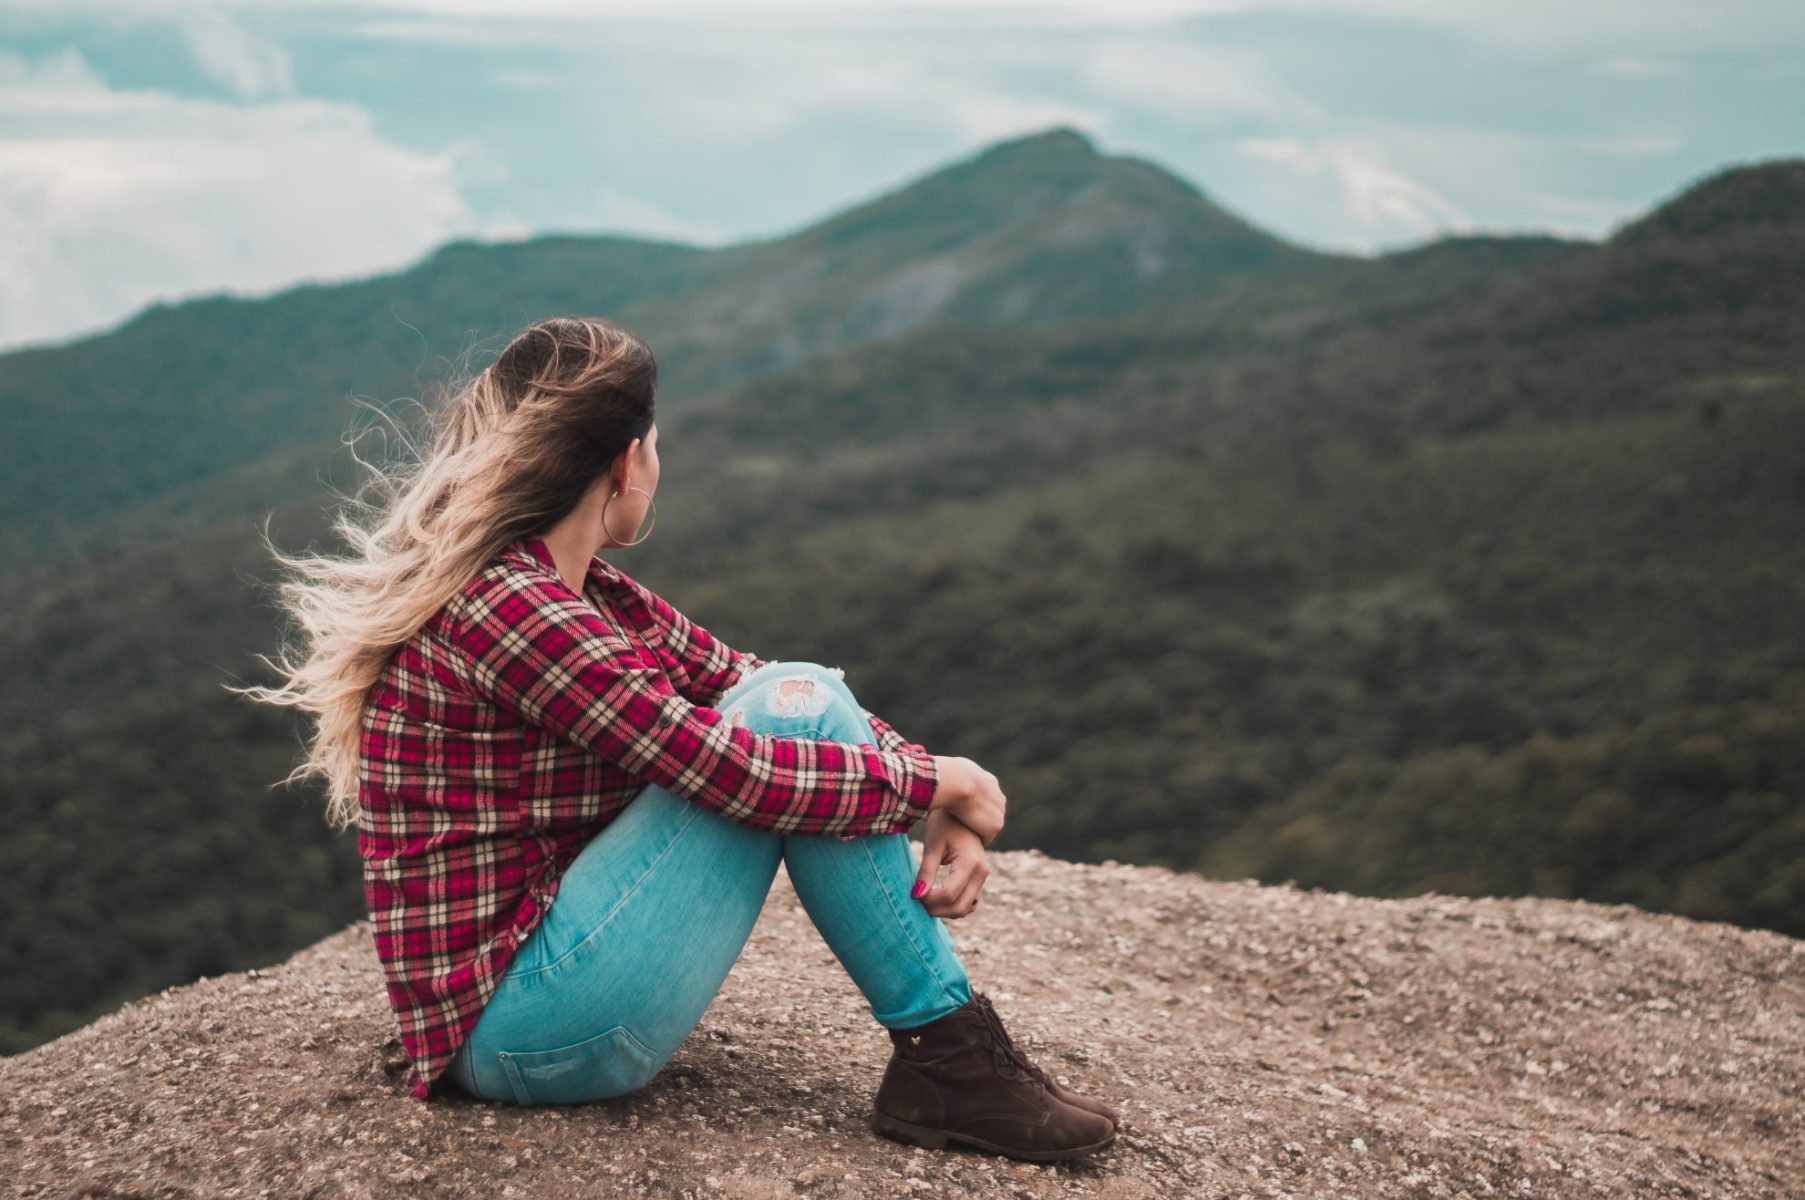 Woman in plaid shirt sitting on a mountain debating what she wants and thinking about how to set realistic goals for her future. 